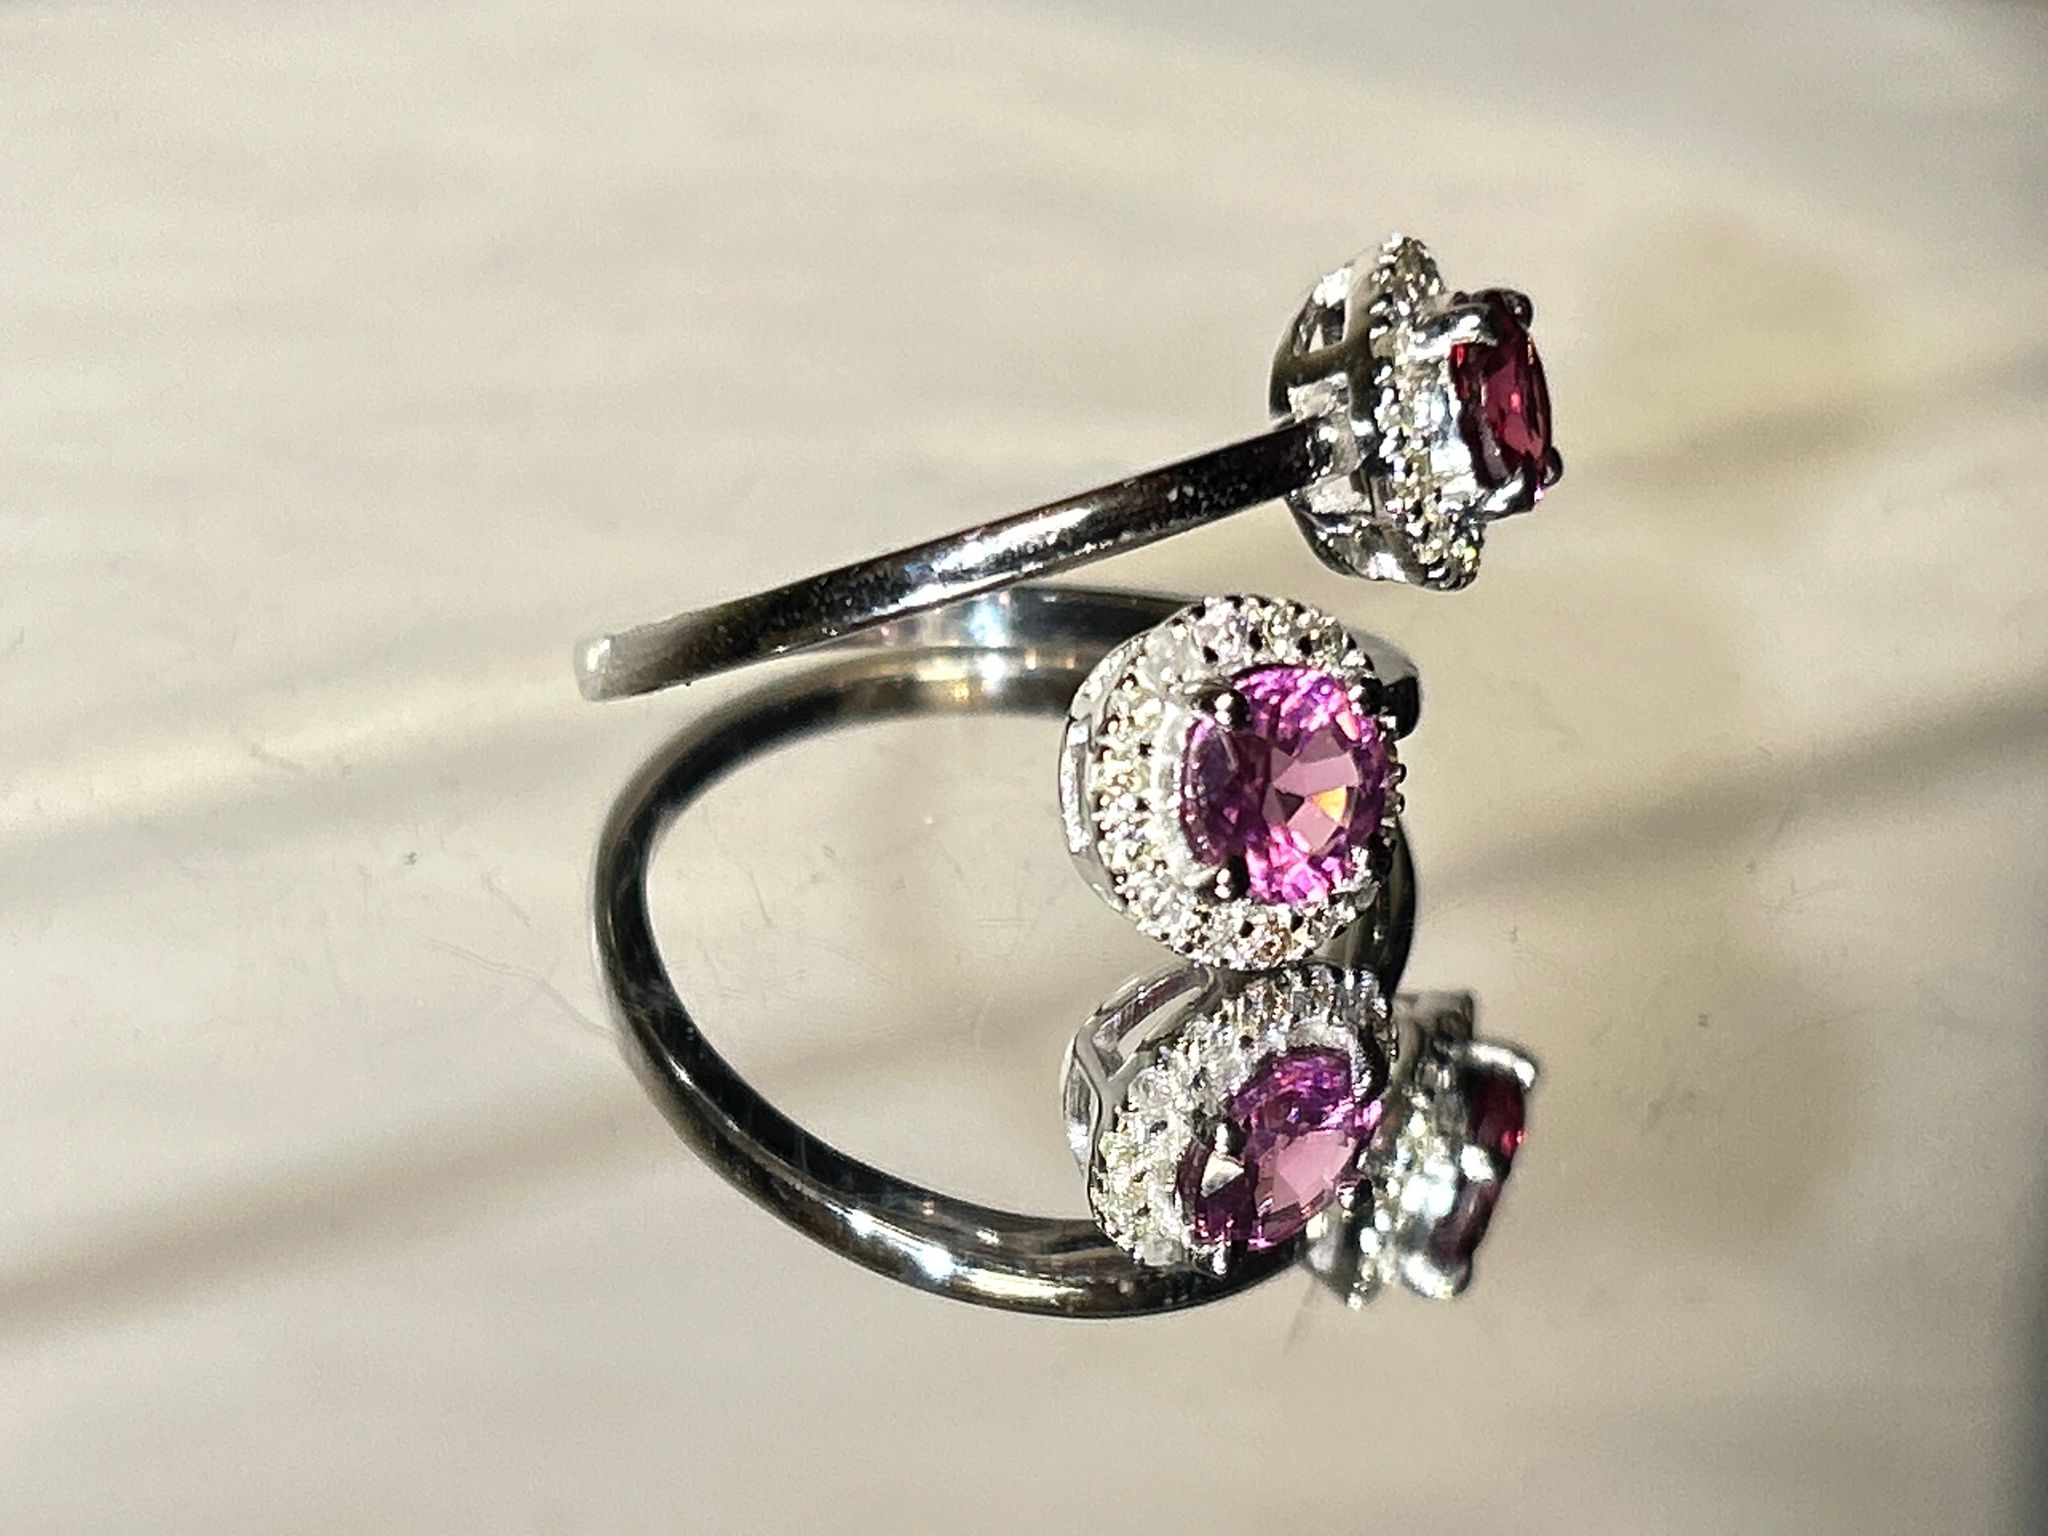 Beautiful Natural Spinel Ring With Diamonds and 18k Gold - Image 4 of 8